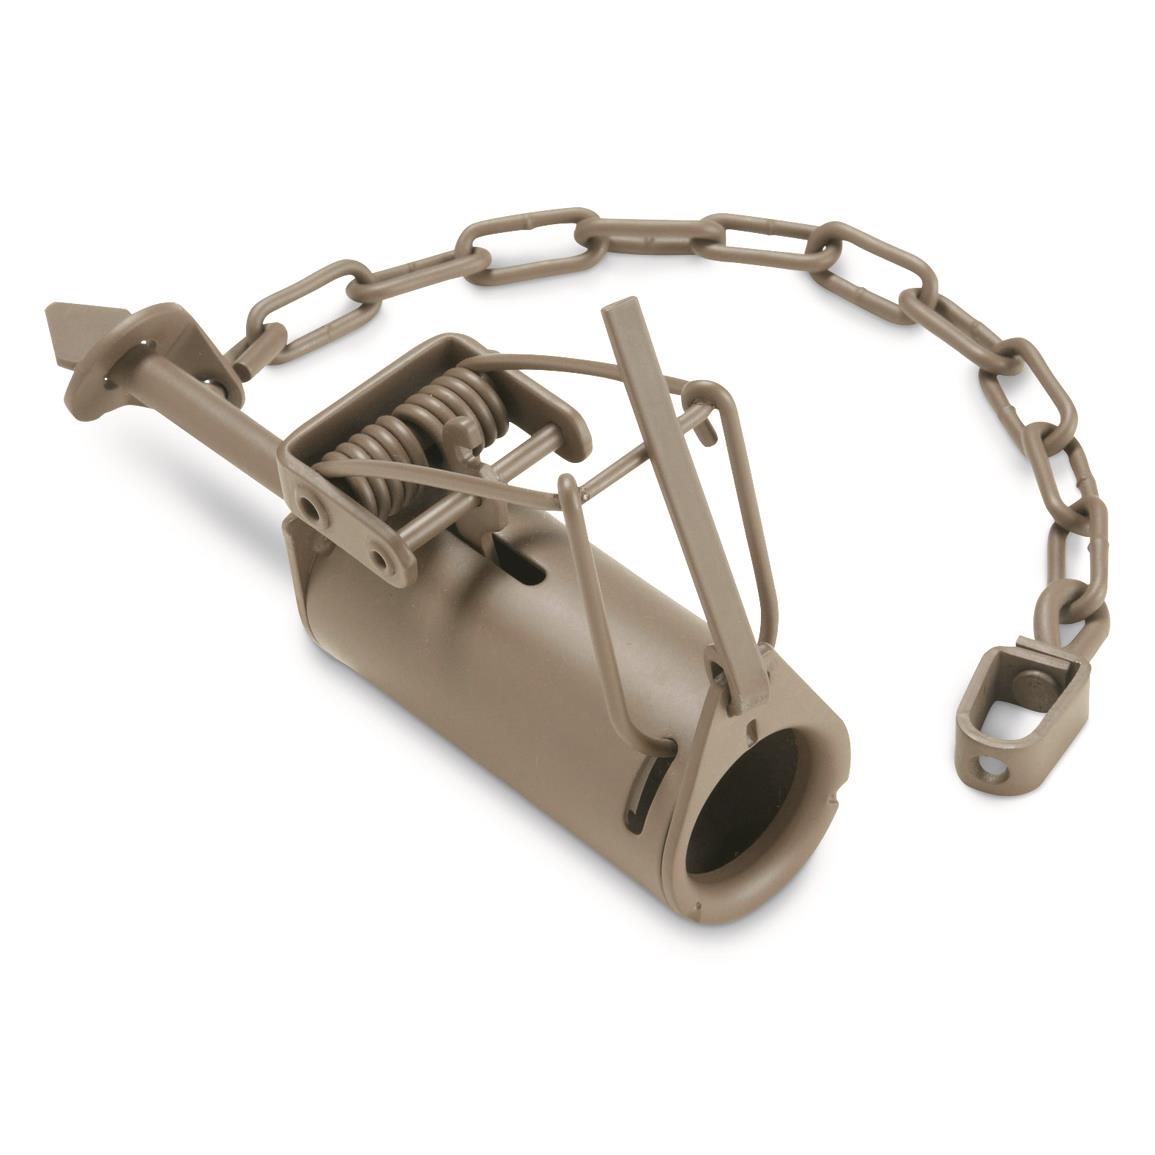 Duke No. 3 Coil Spring Trap - 717040, Traps & Trapping Supplies at  Sportsman's Guide